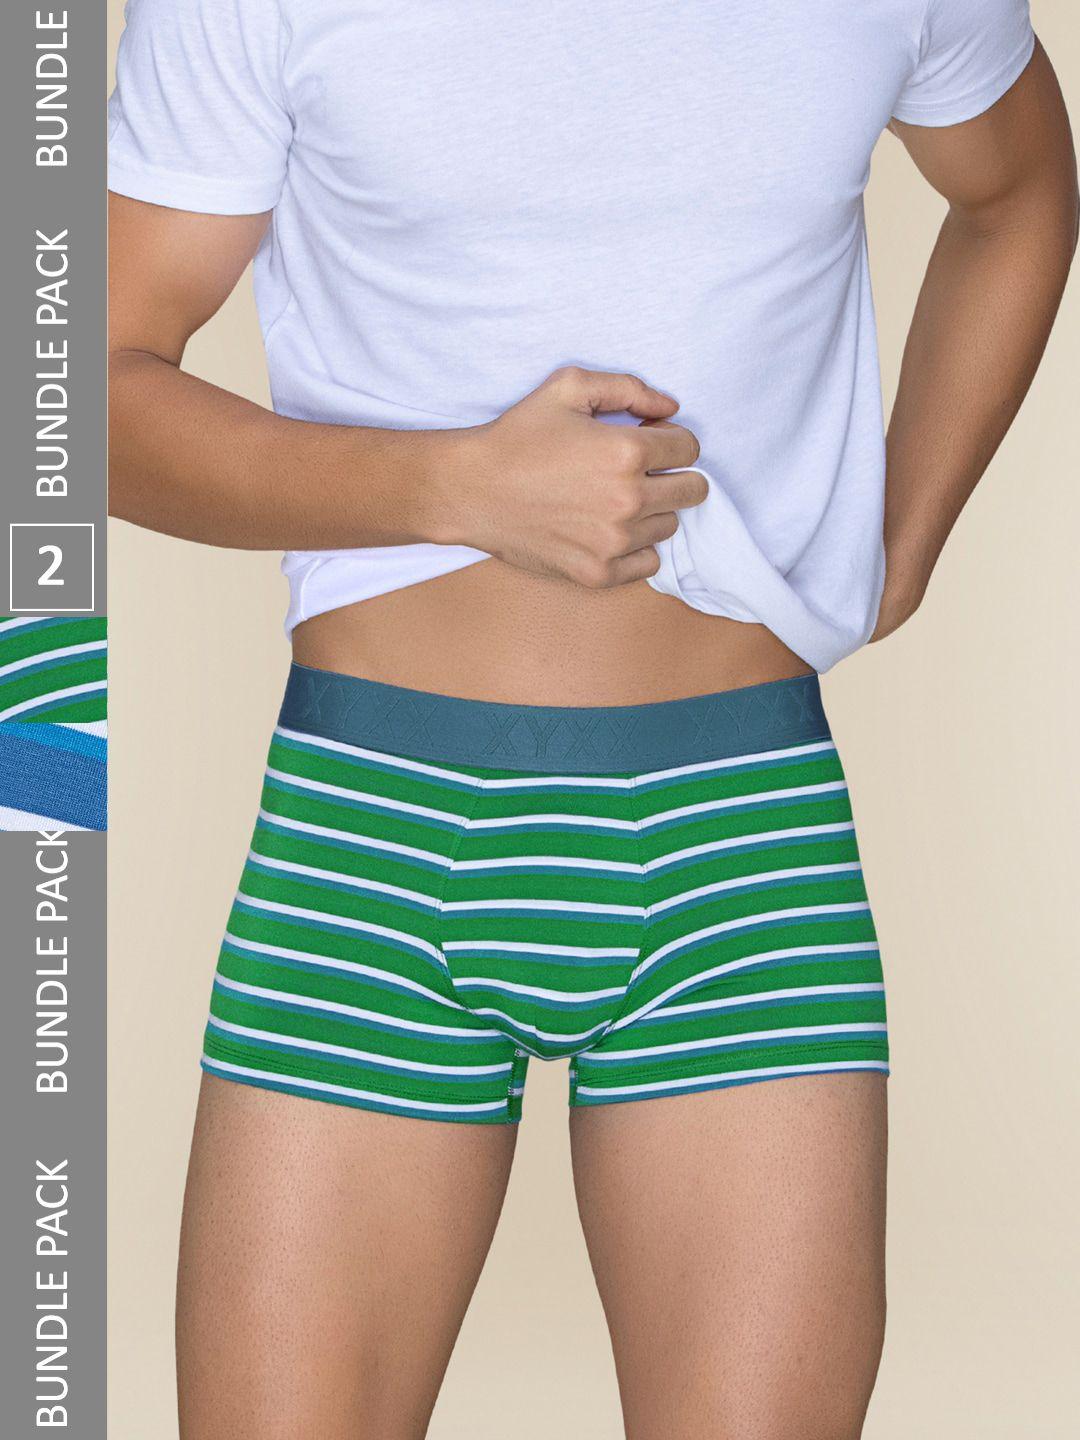 xyxx pack of 2 striped linea micro modal trunks xytrnk2pckn691